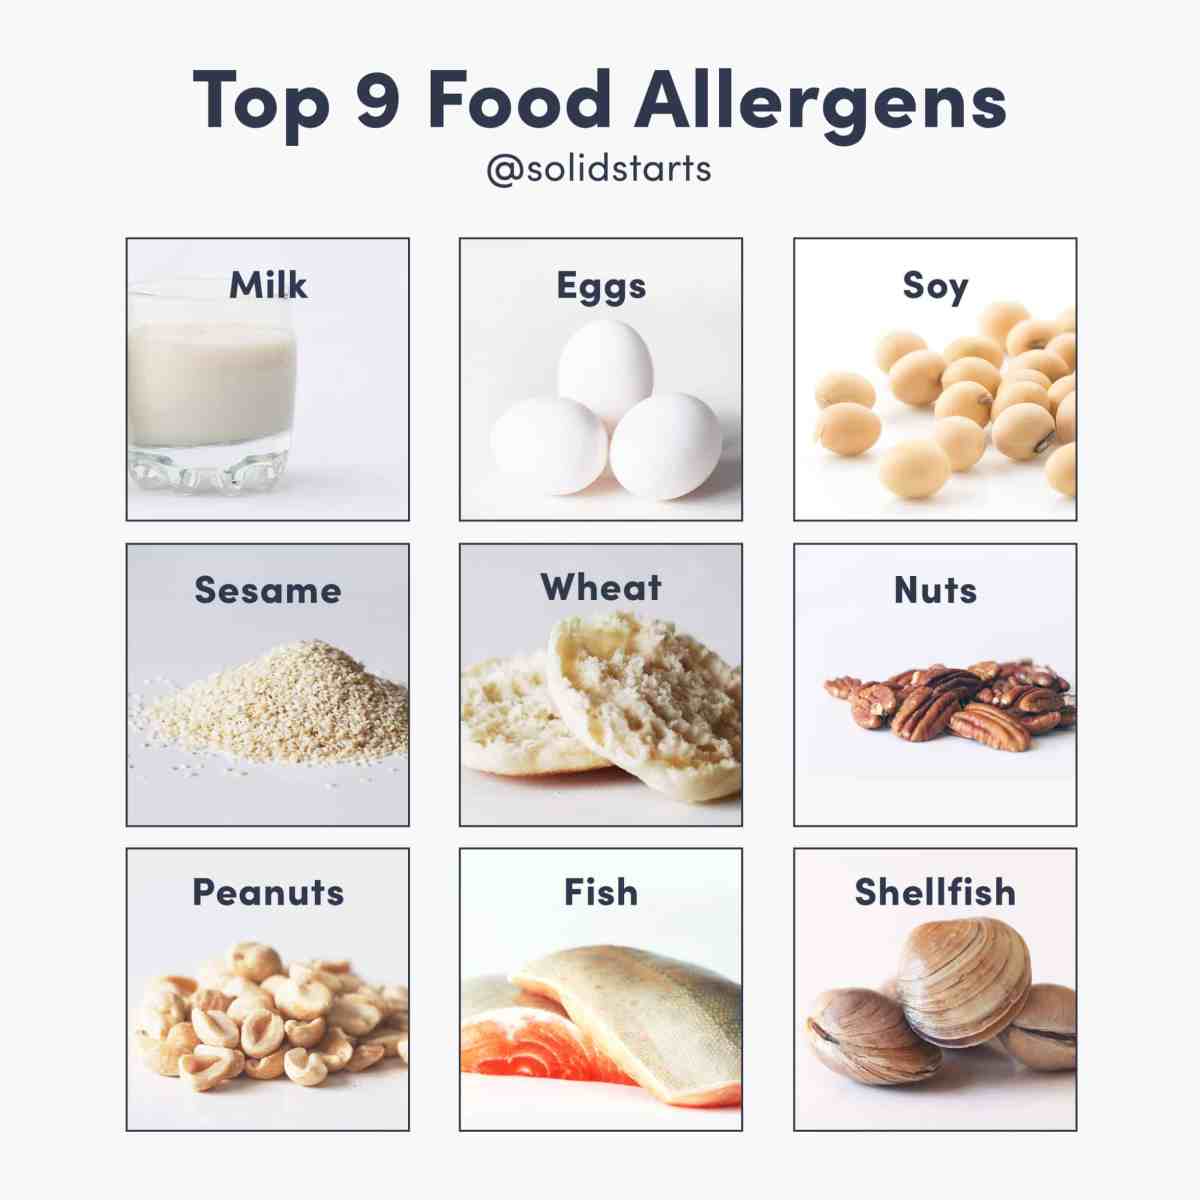 A Closer Look at the Most Common Allergens